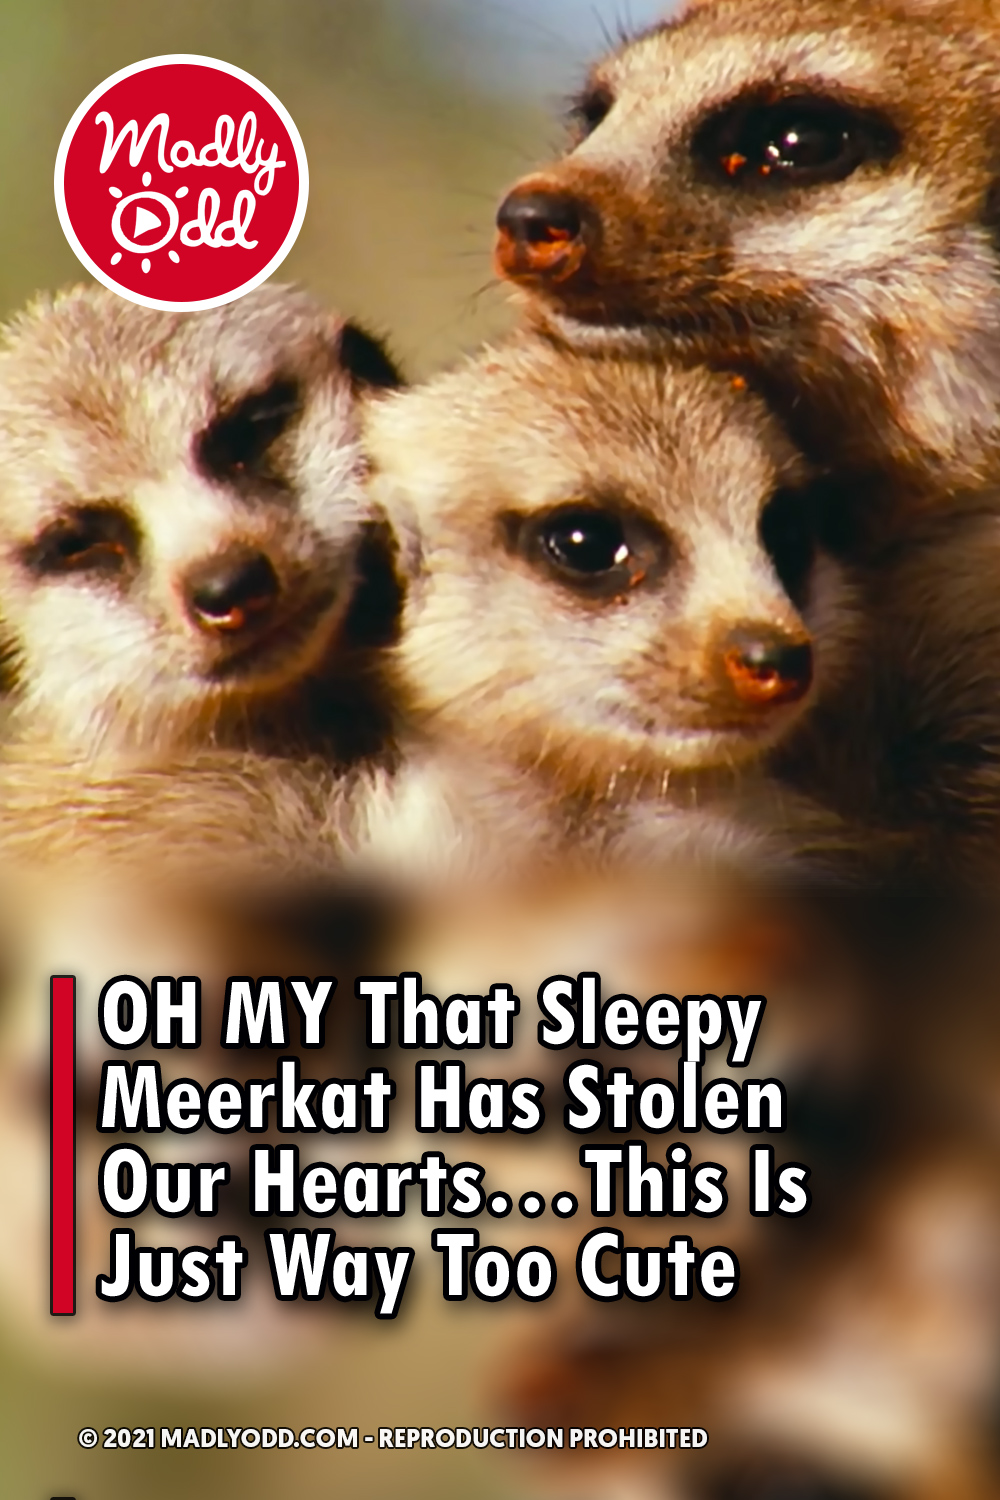 OH MY That Sleepy Meerkat Has Stolen Our Hearts...This Is Just Way Too Cute